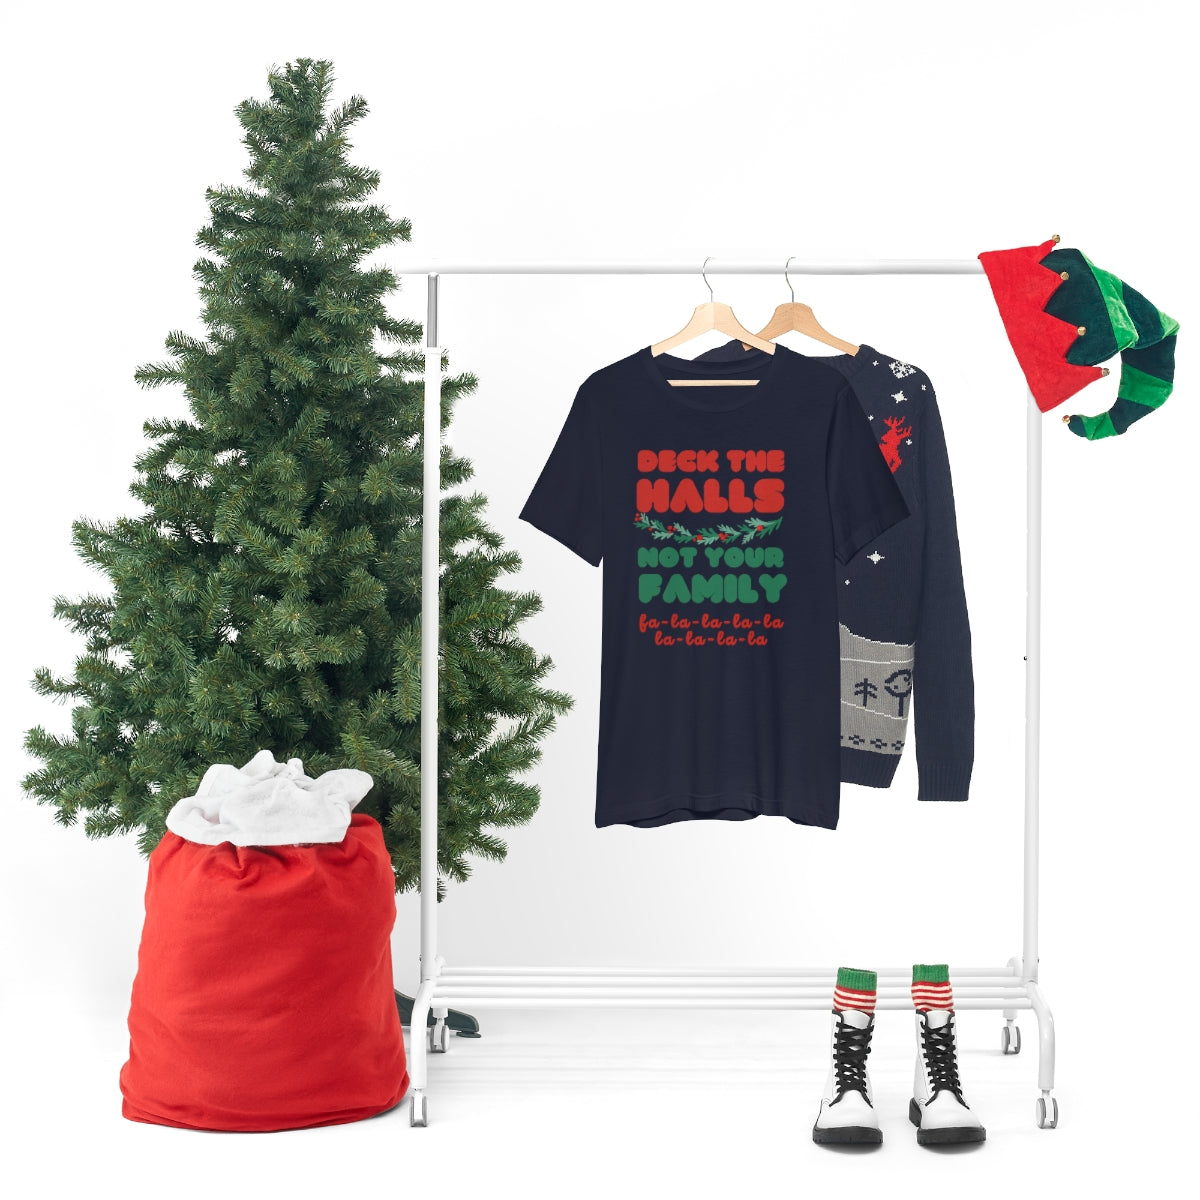 Deck the halls not your family 2 Unisex Jersey Short Sleeve Tee